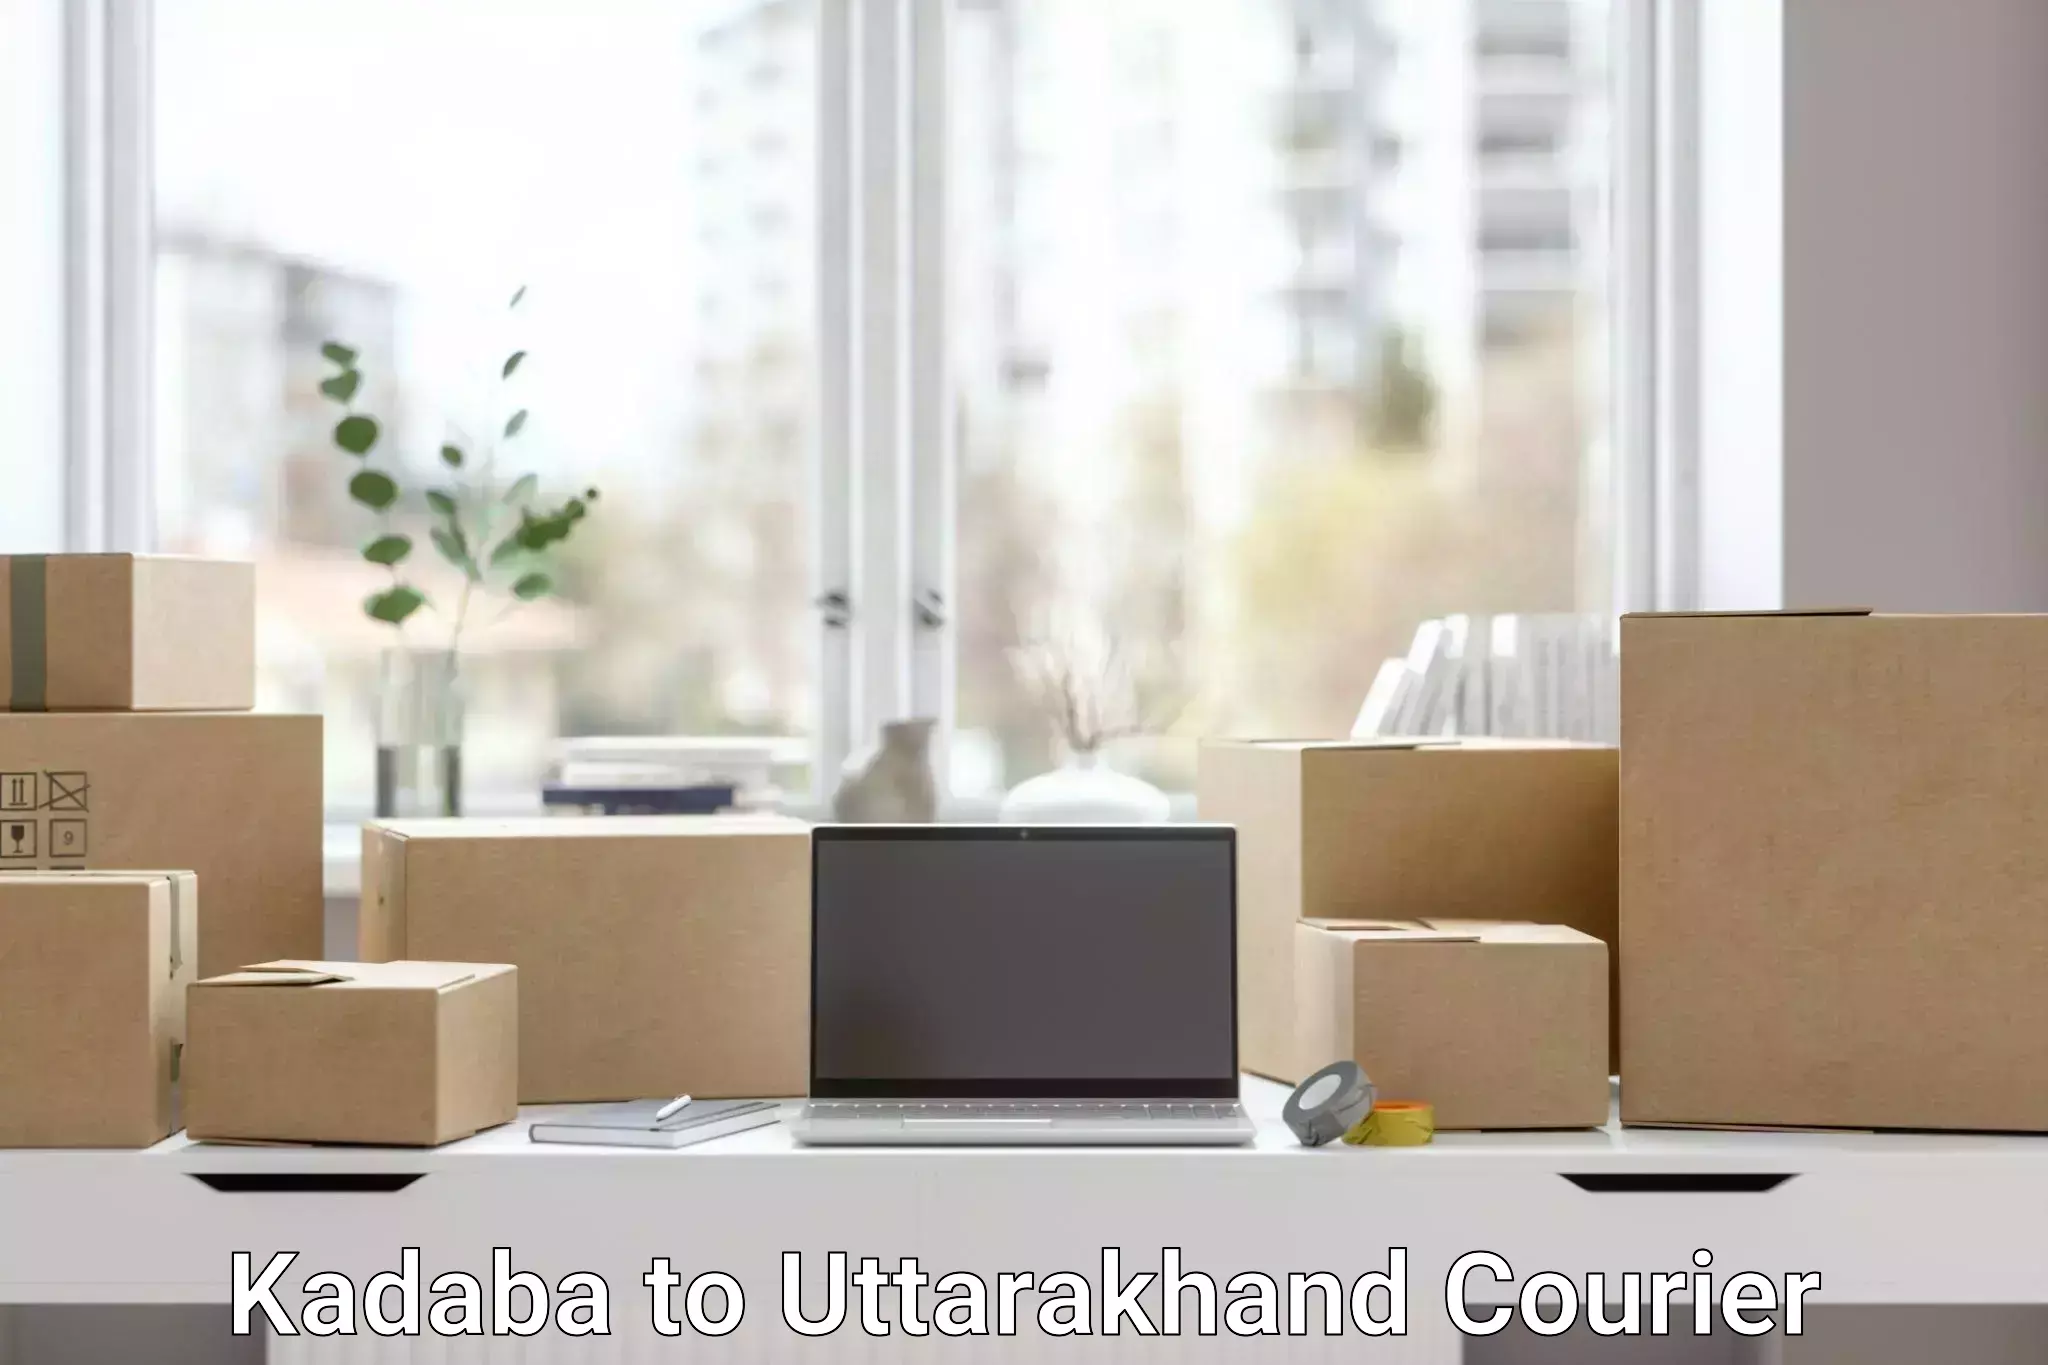 State-of-the-art courier technology Kadaba to Roorkee